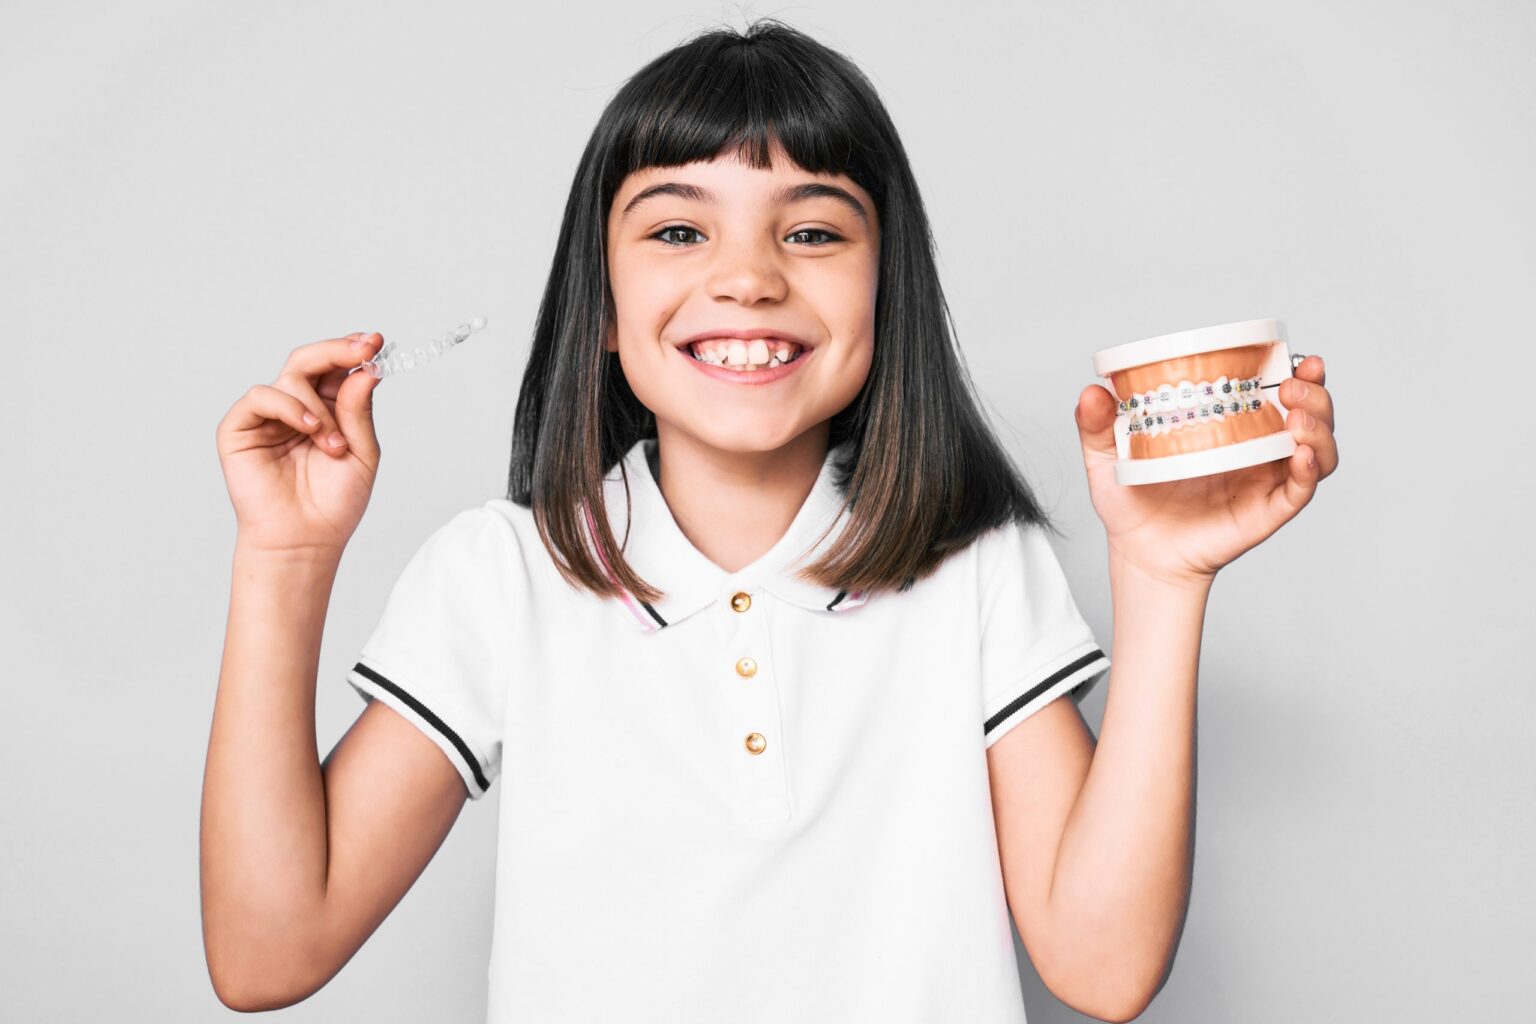 Young little girl with bang holding invisible aligner orthodontic and braces smiling with a happy and cool smile on face, showing teeth.